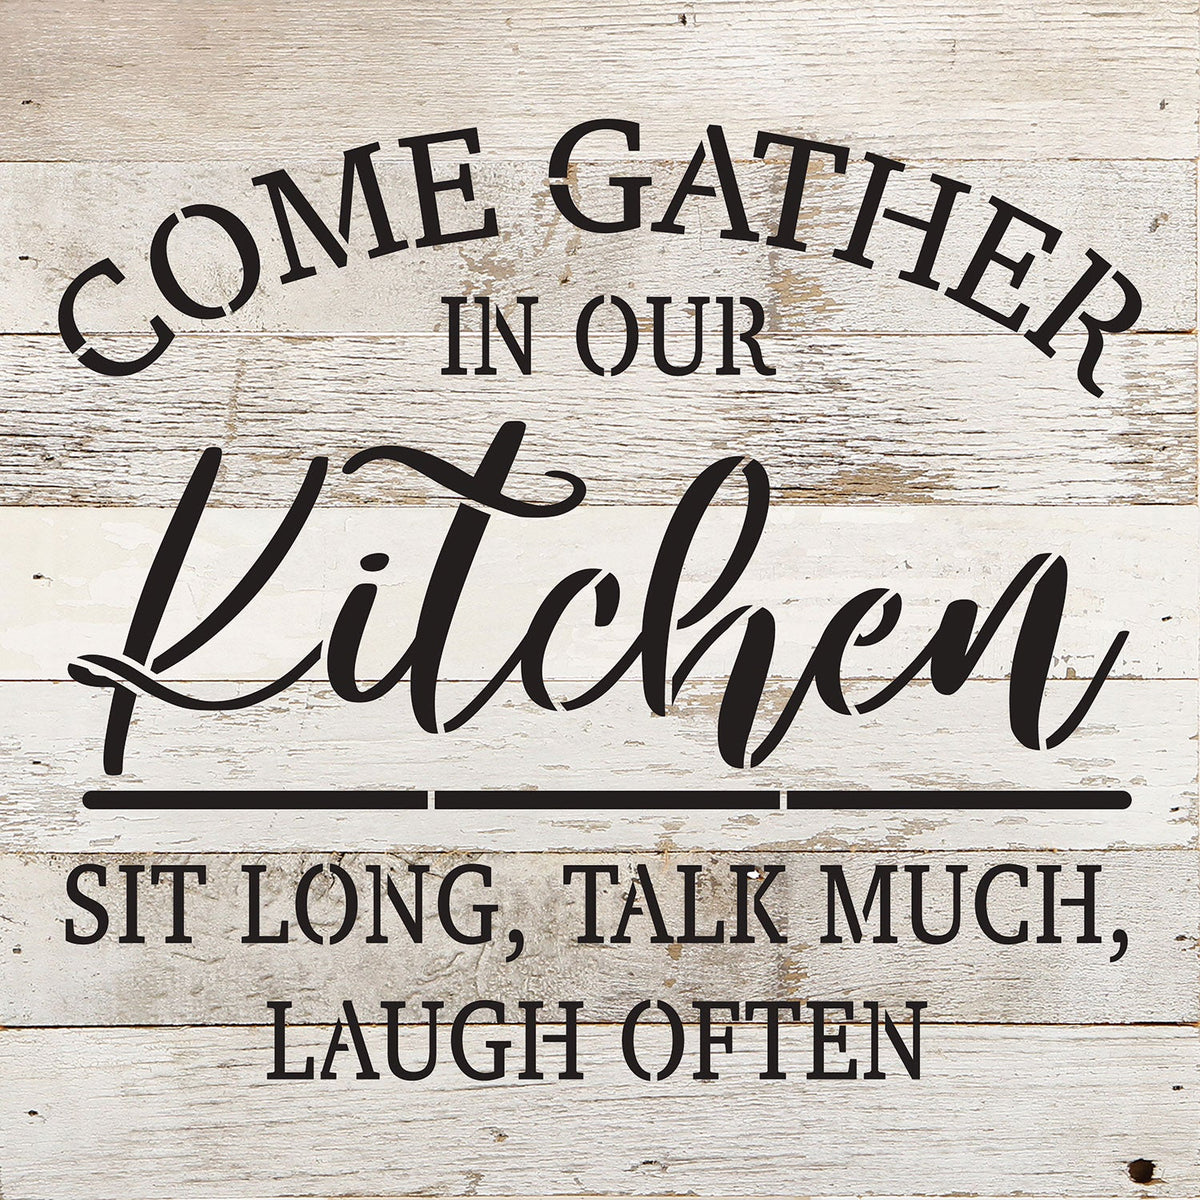 Come Gather in our Kitchen. Sit Long, Talk Much, Laugh Often / 10x10 Reclaimed Wood Wall Decor